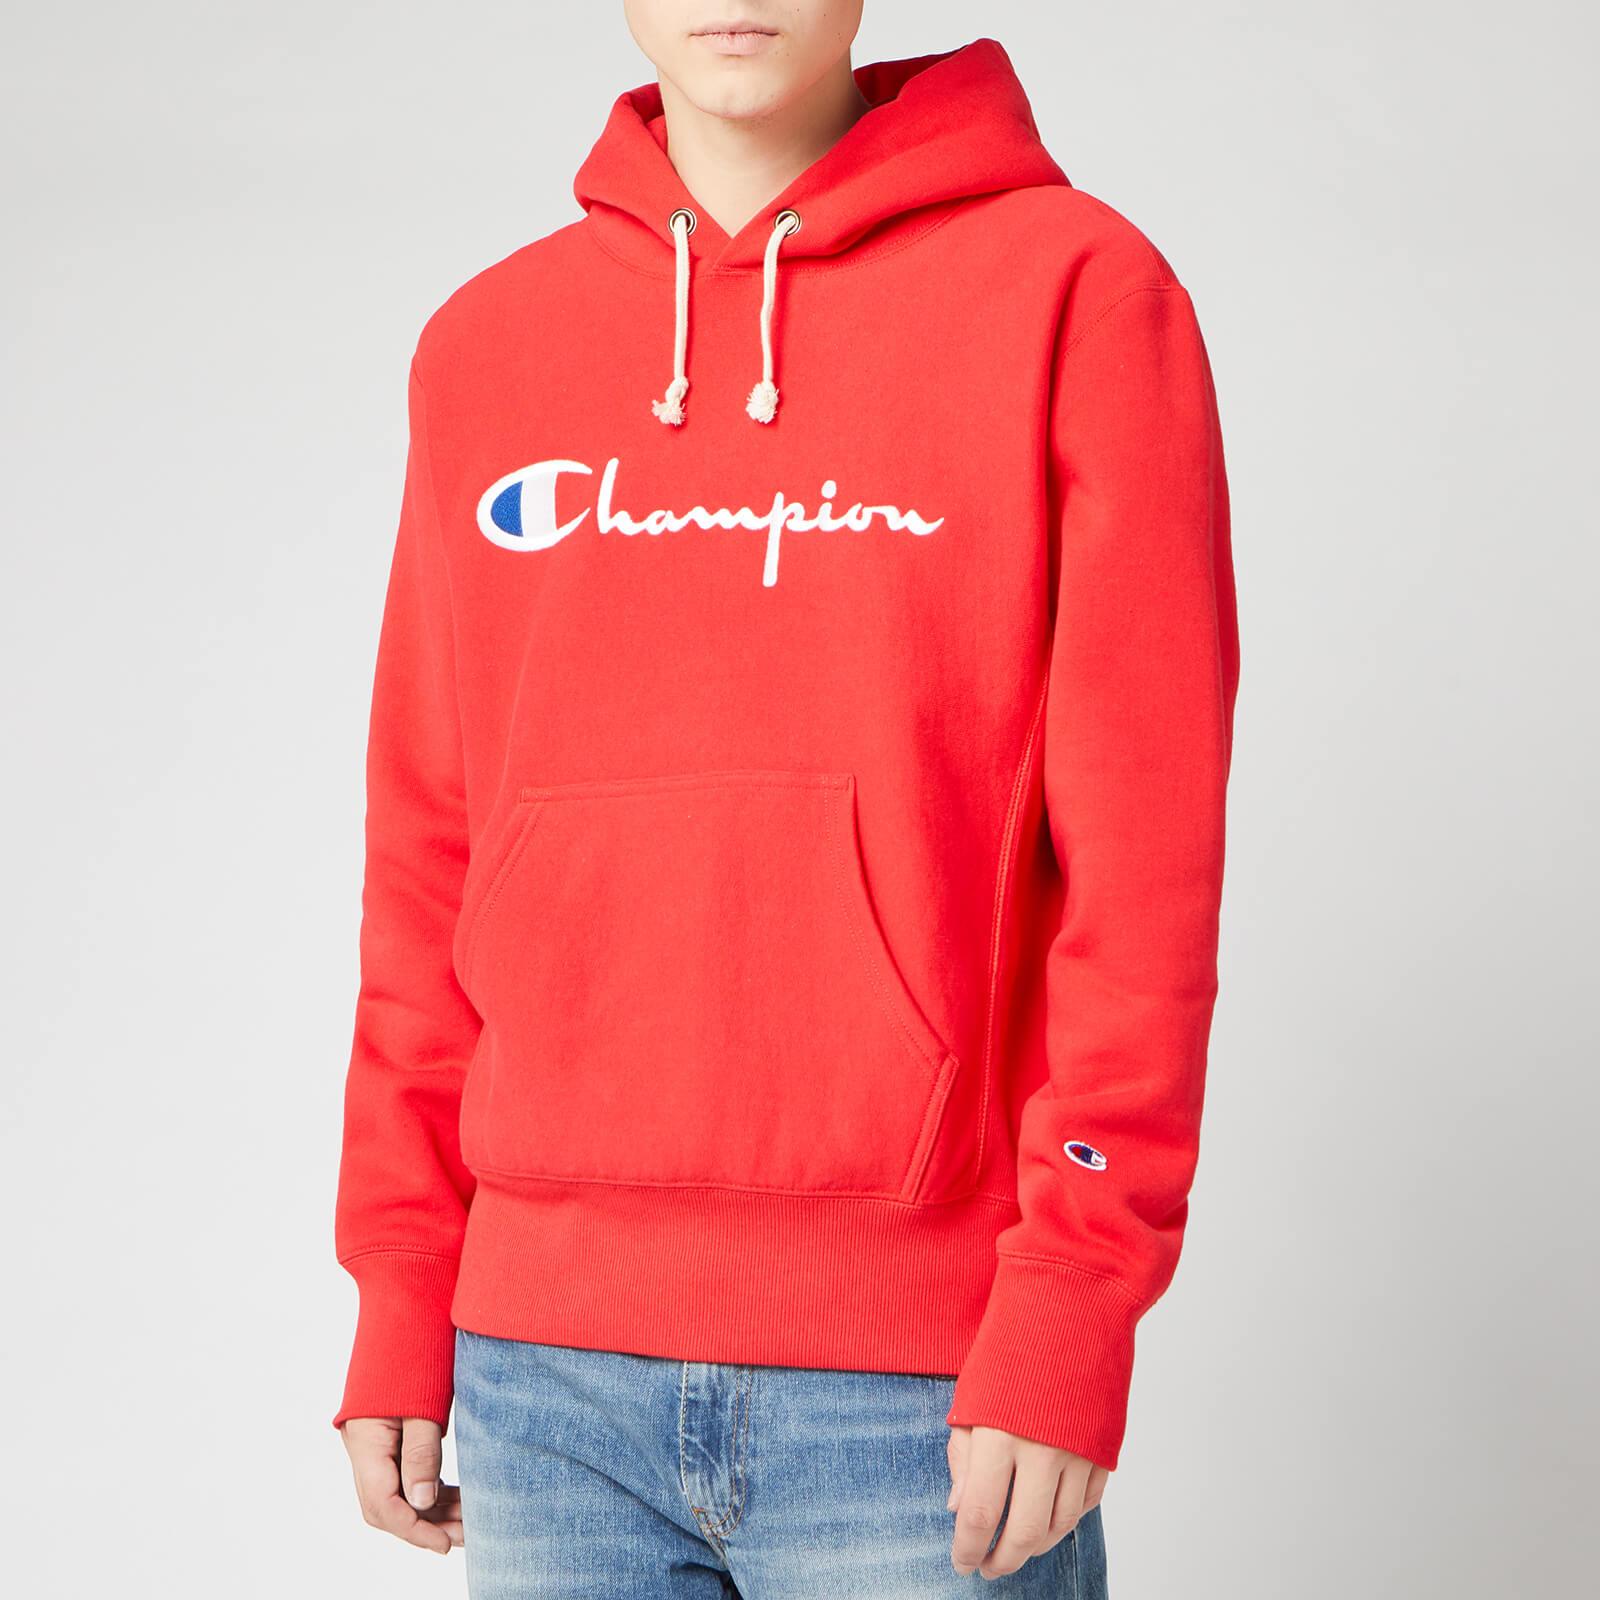 Champion Big Script Hooded Sweatshirt in Red for Men - Save 48% - Lyst